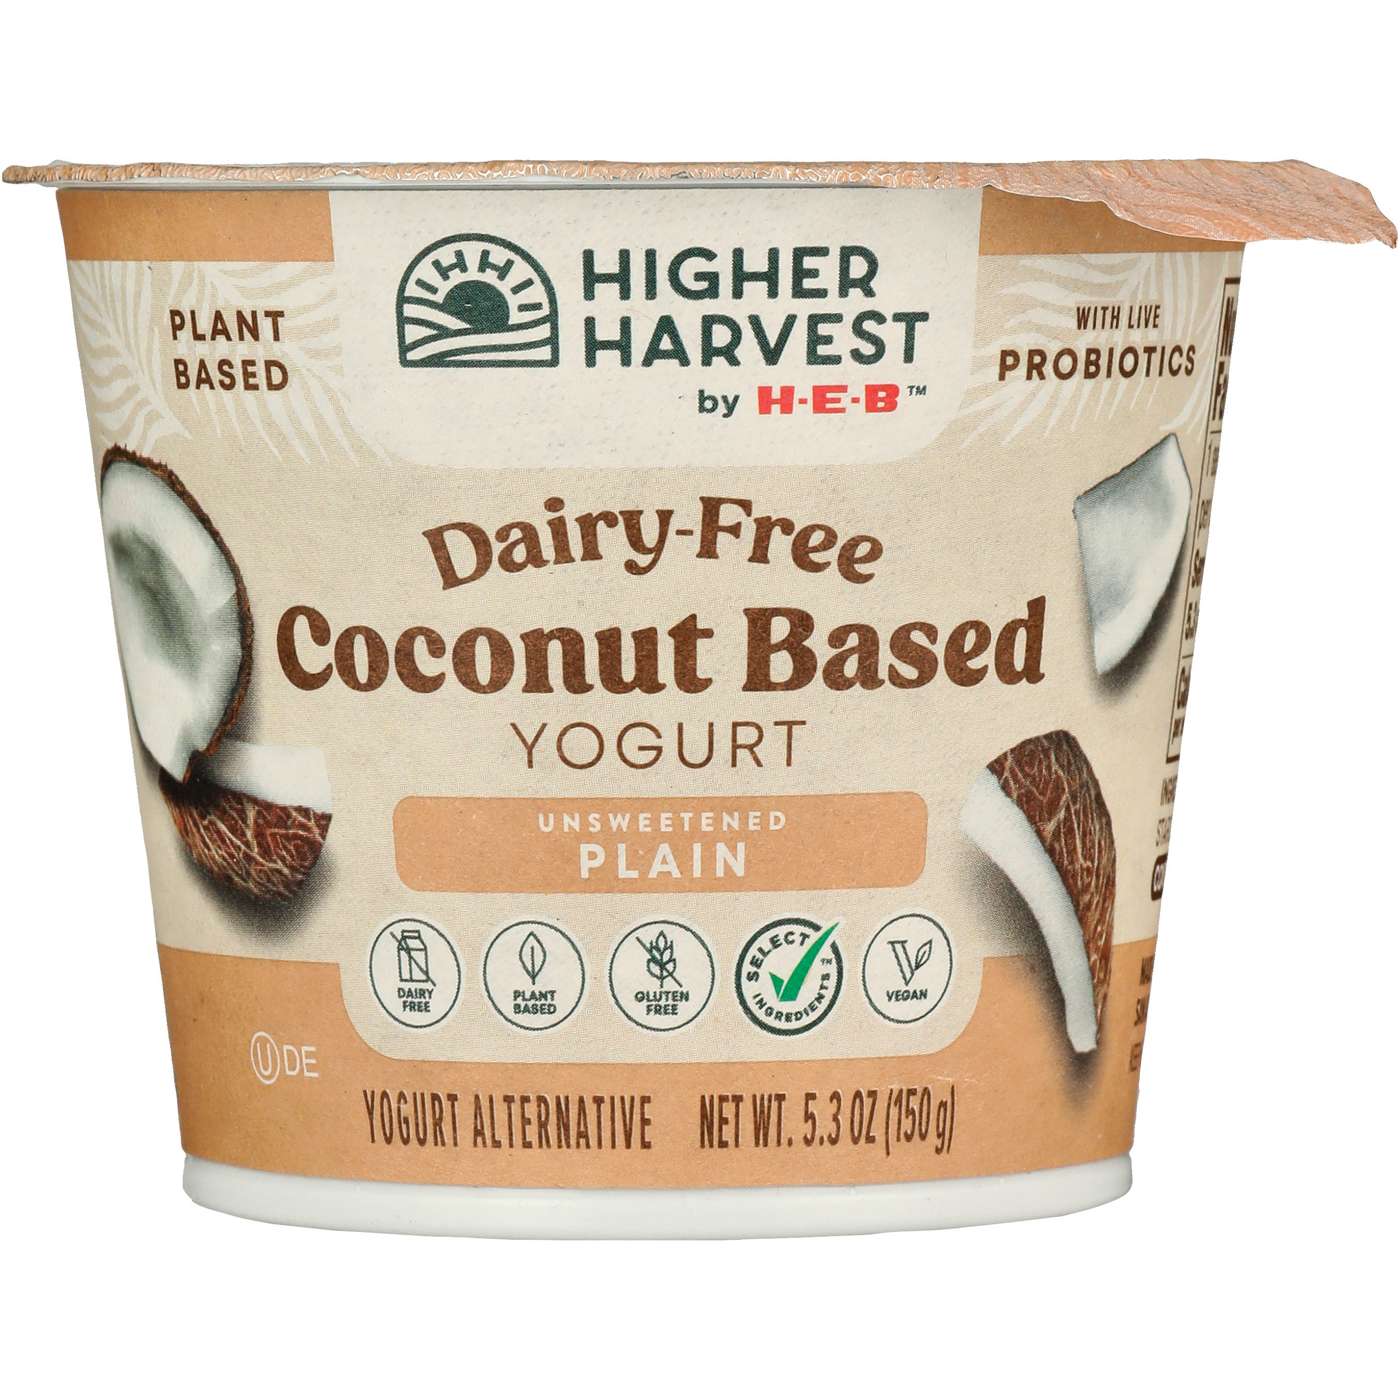 Higher Harvest by H-E-B Dairy-Free Coconut-Based Yogurt – Unsweetened Plain; image 1 of 3